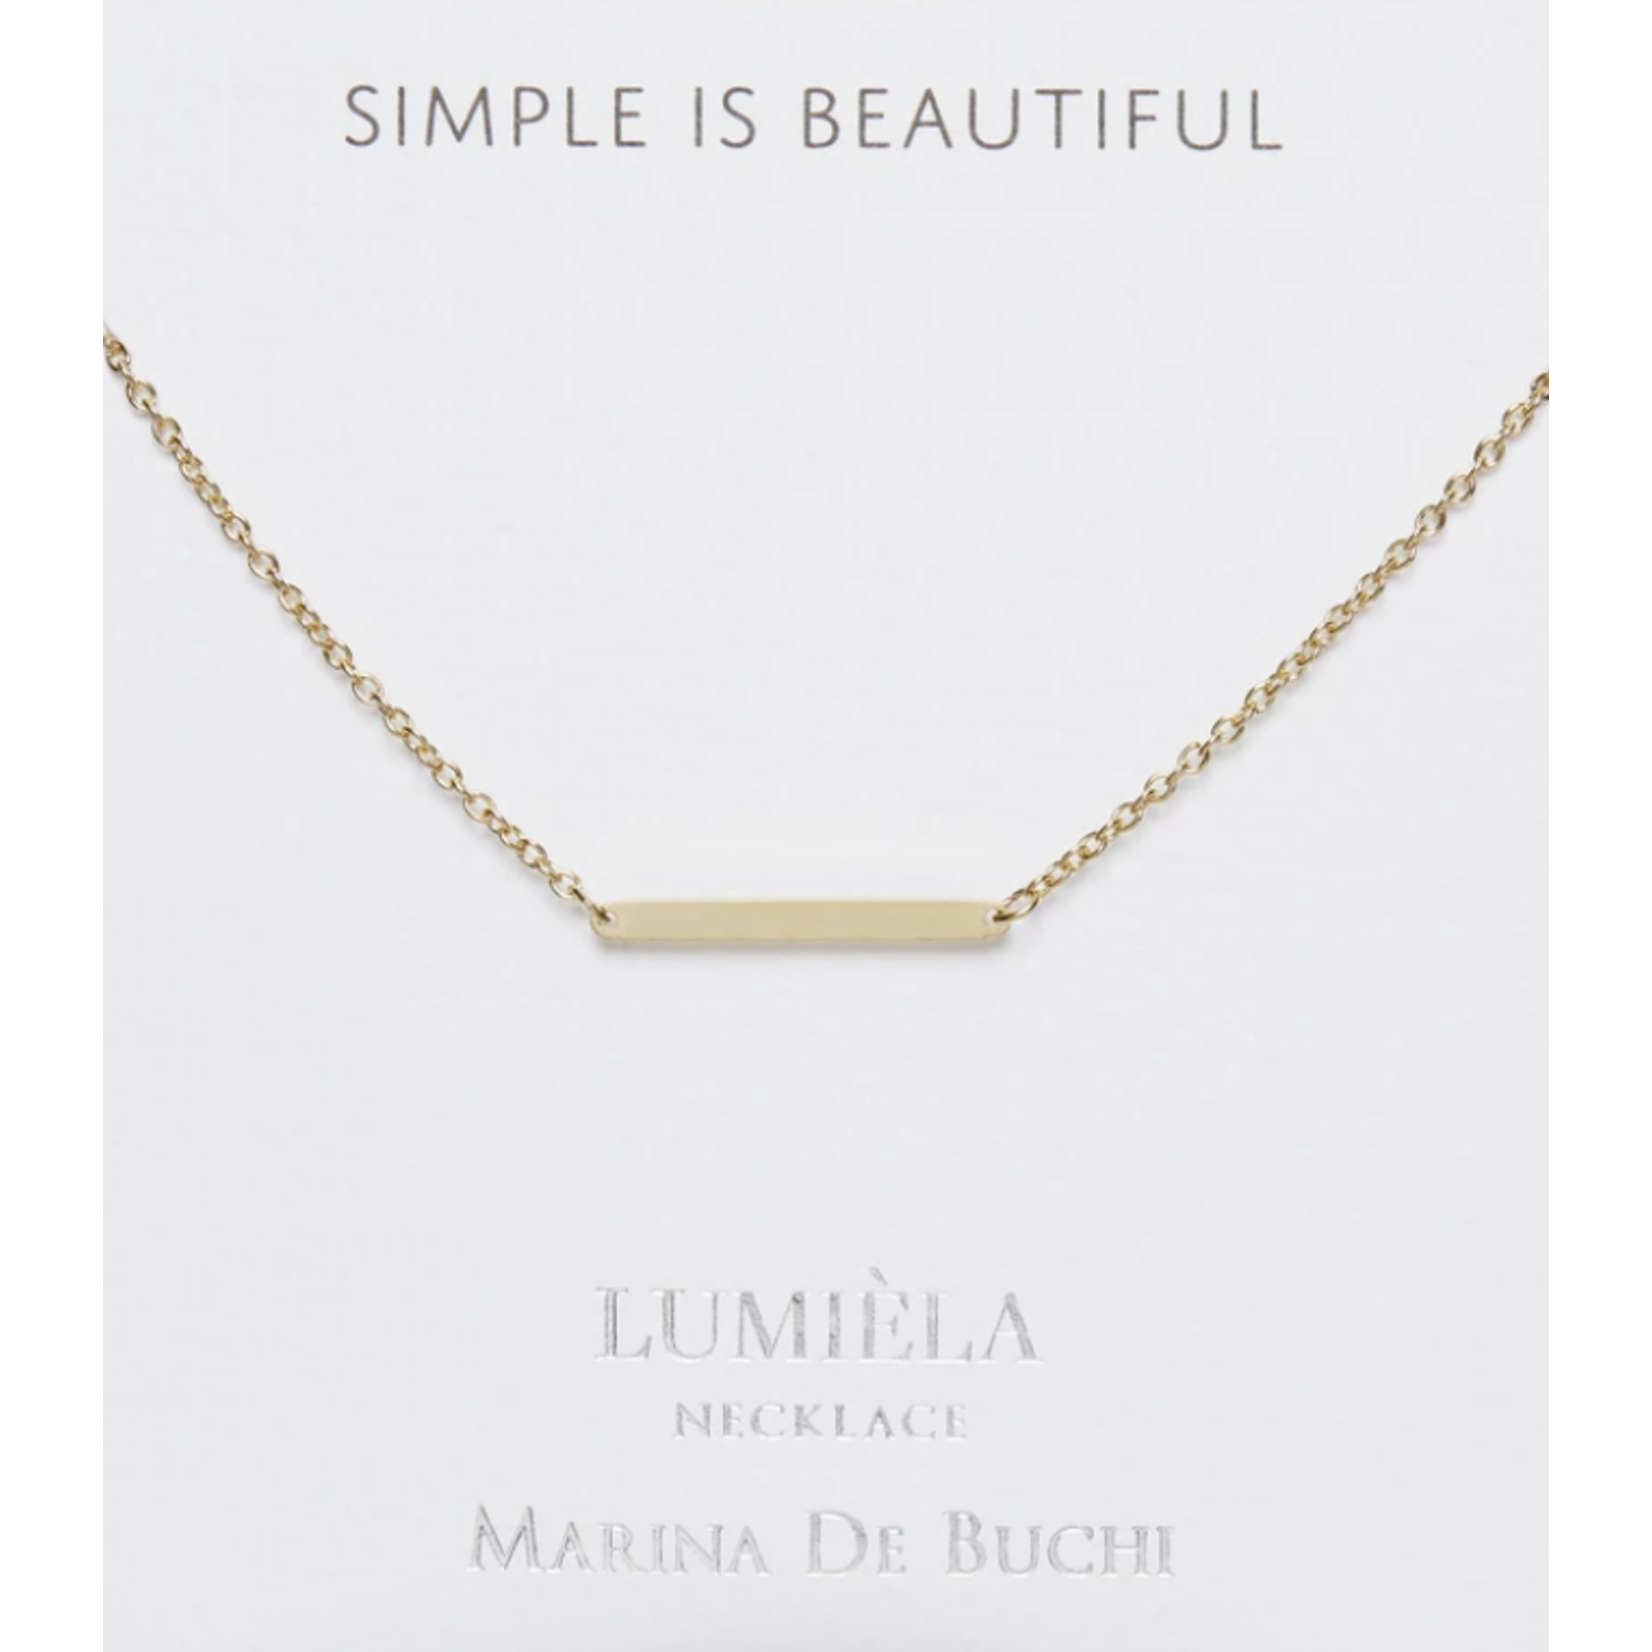 Lumiela 'Simple is Beautiful' Gold-Plated Necklace